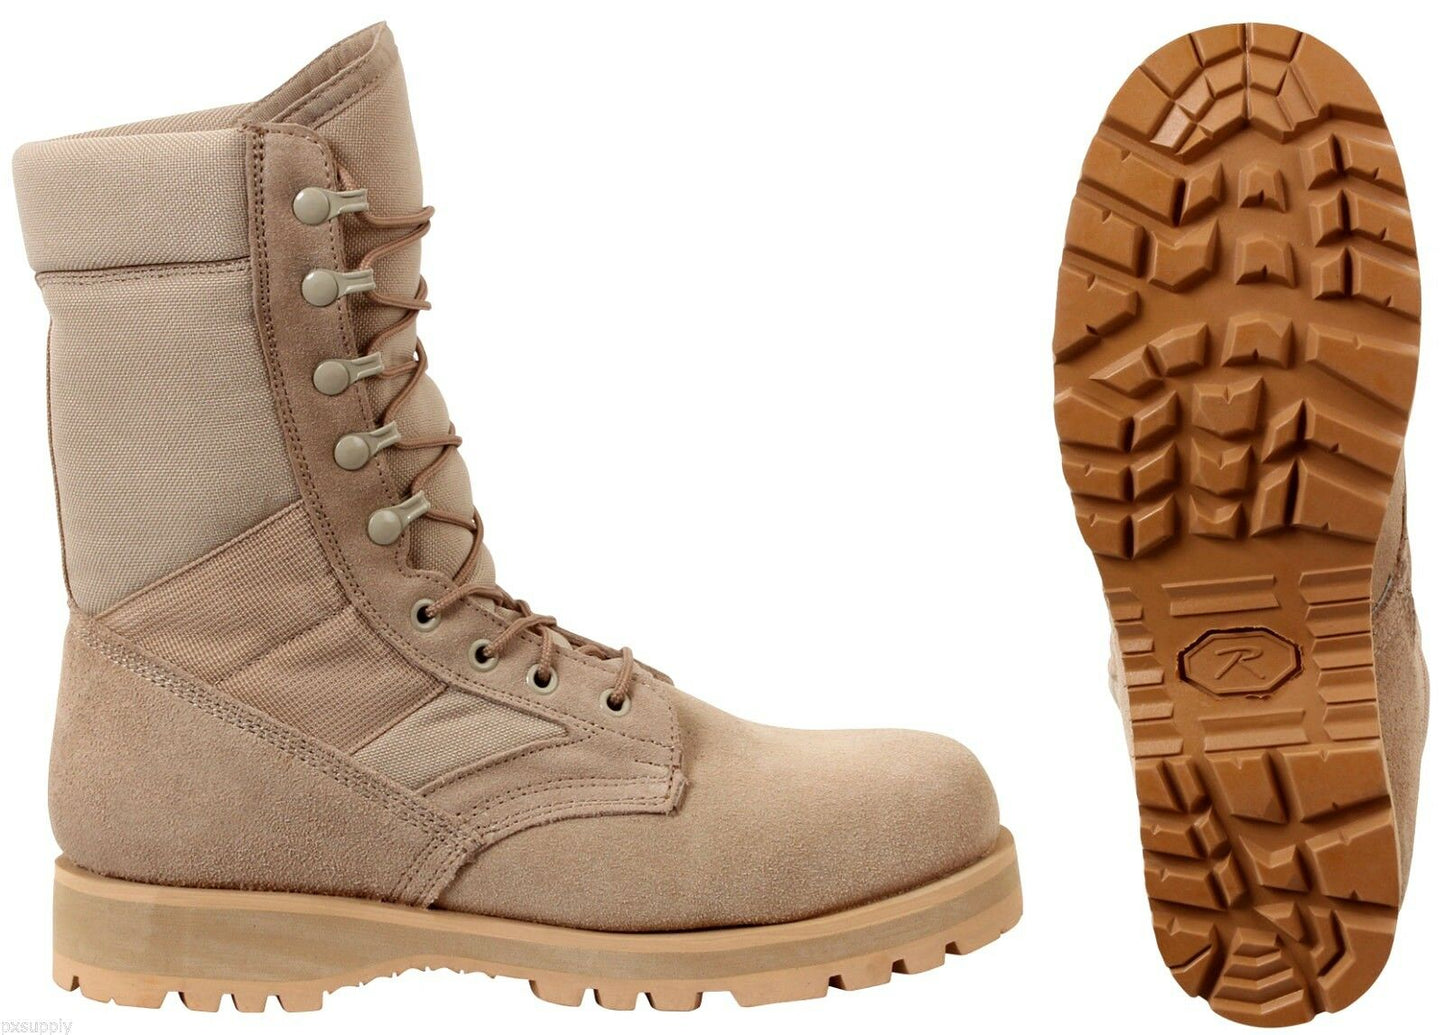 Rothco G.I. Type Sierra Sole Tactical Boots - Desert Sand